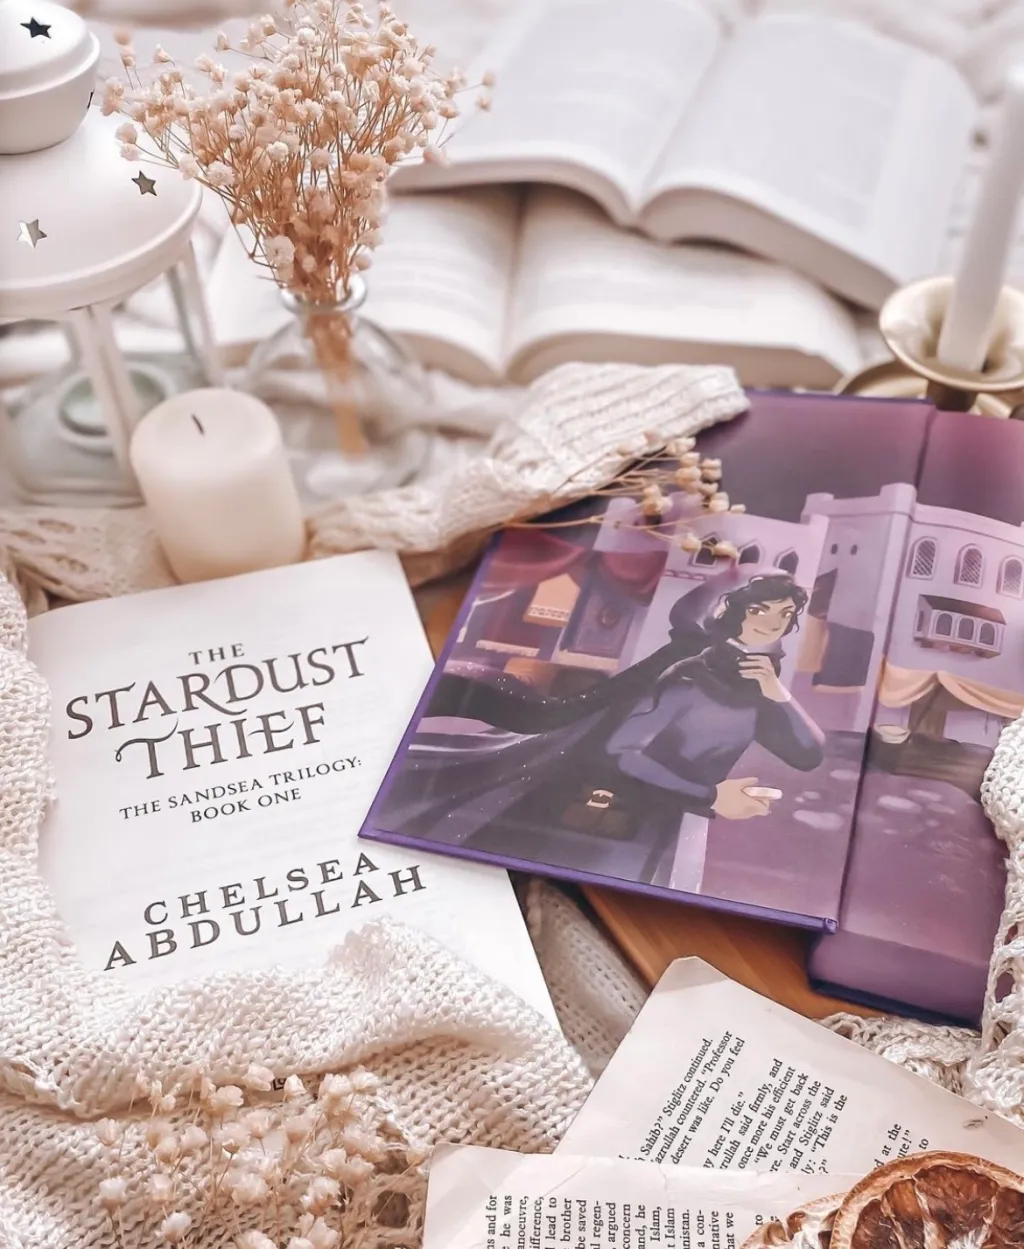 The Stardust Thief Readalong: Day 2!